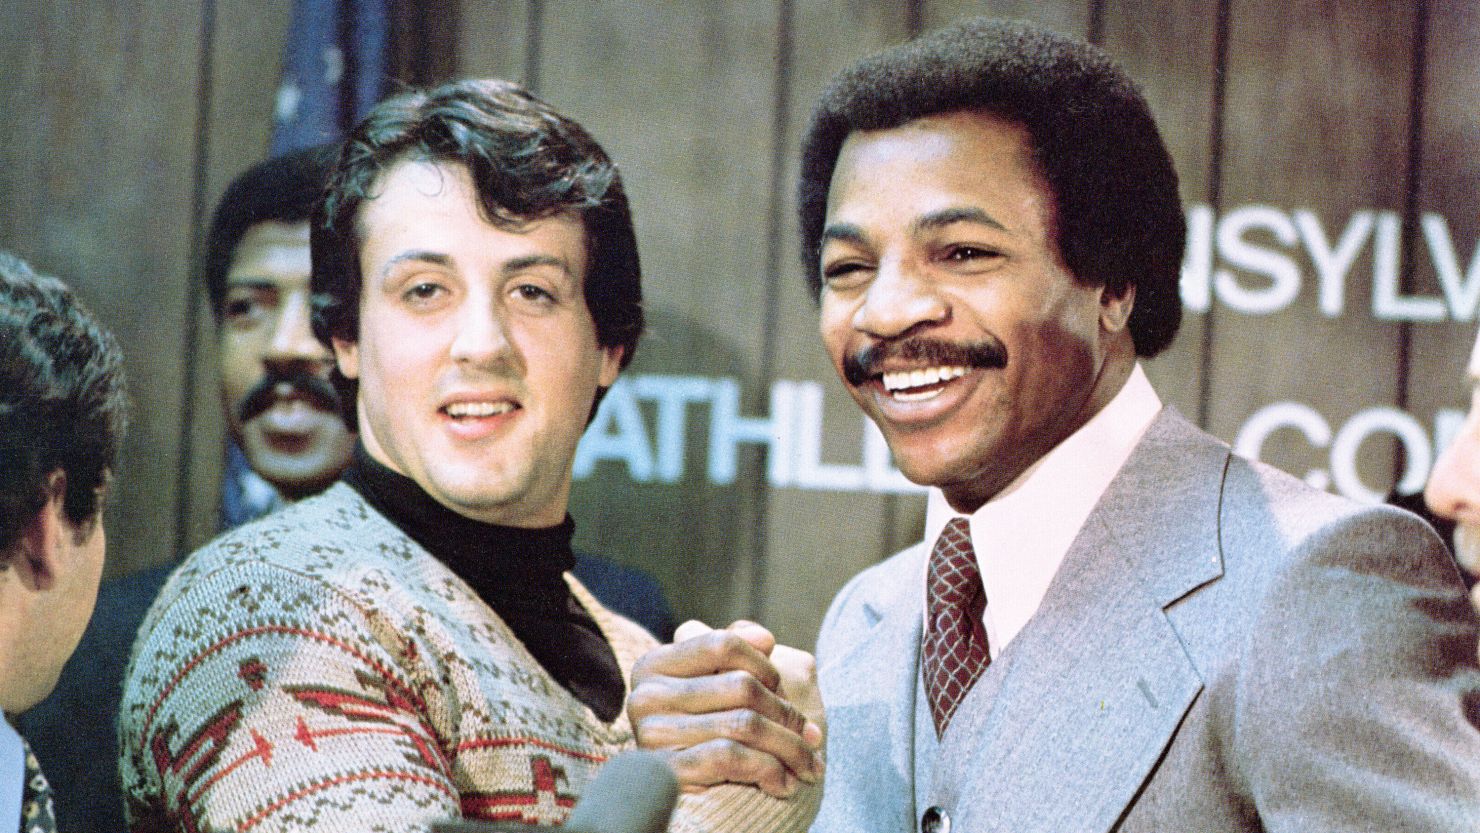 Sylvester Stallone and Carl Weathers grip hands and smile together during a press conference in a still from the film, 'Rocky,' directed by John G. Avildsen, 1976.